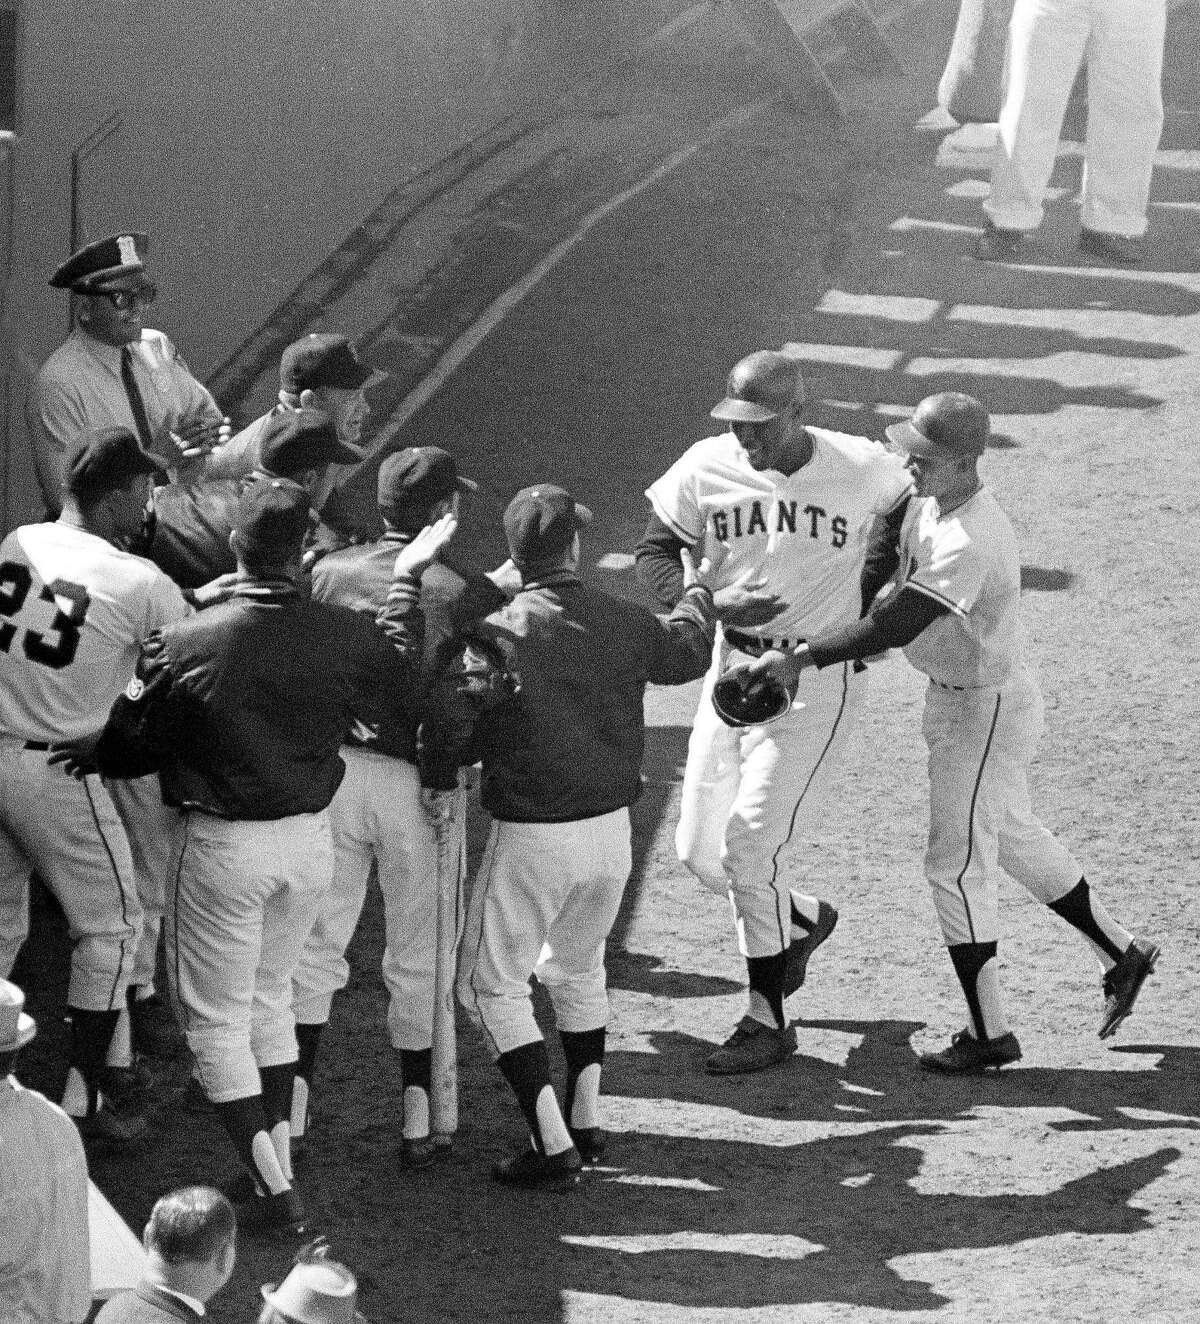 A jersey worn by Willie Mays during Giants' first year in S.F. is up for  auction and expected to fetch $60,000